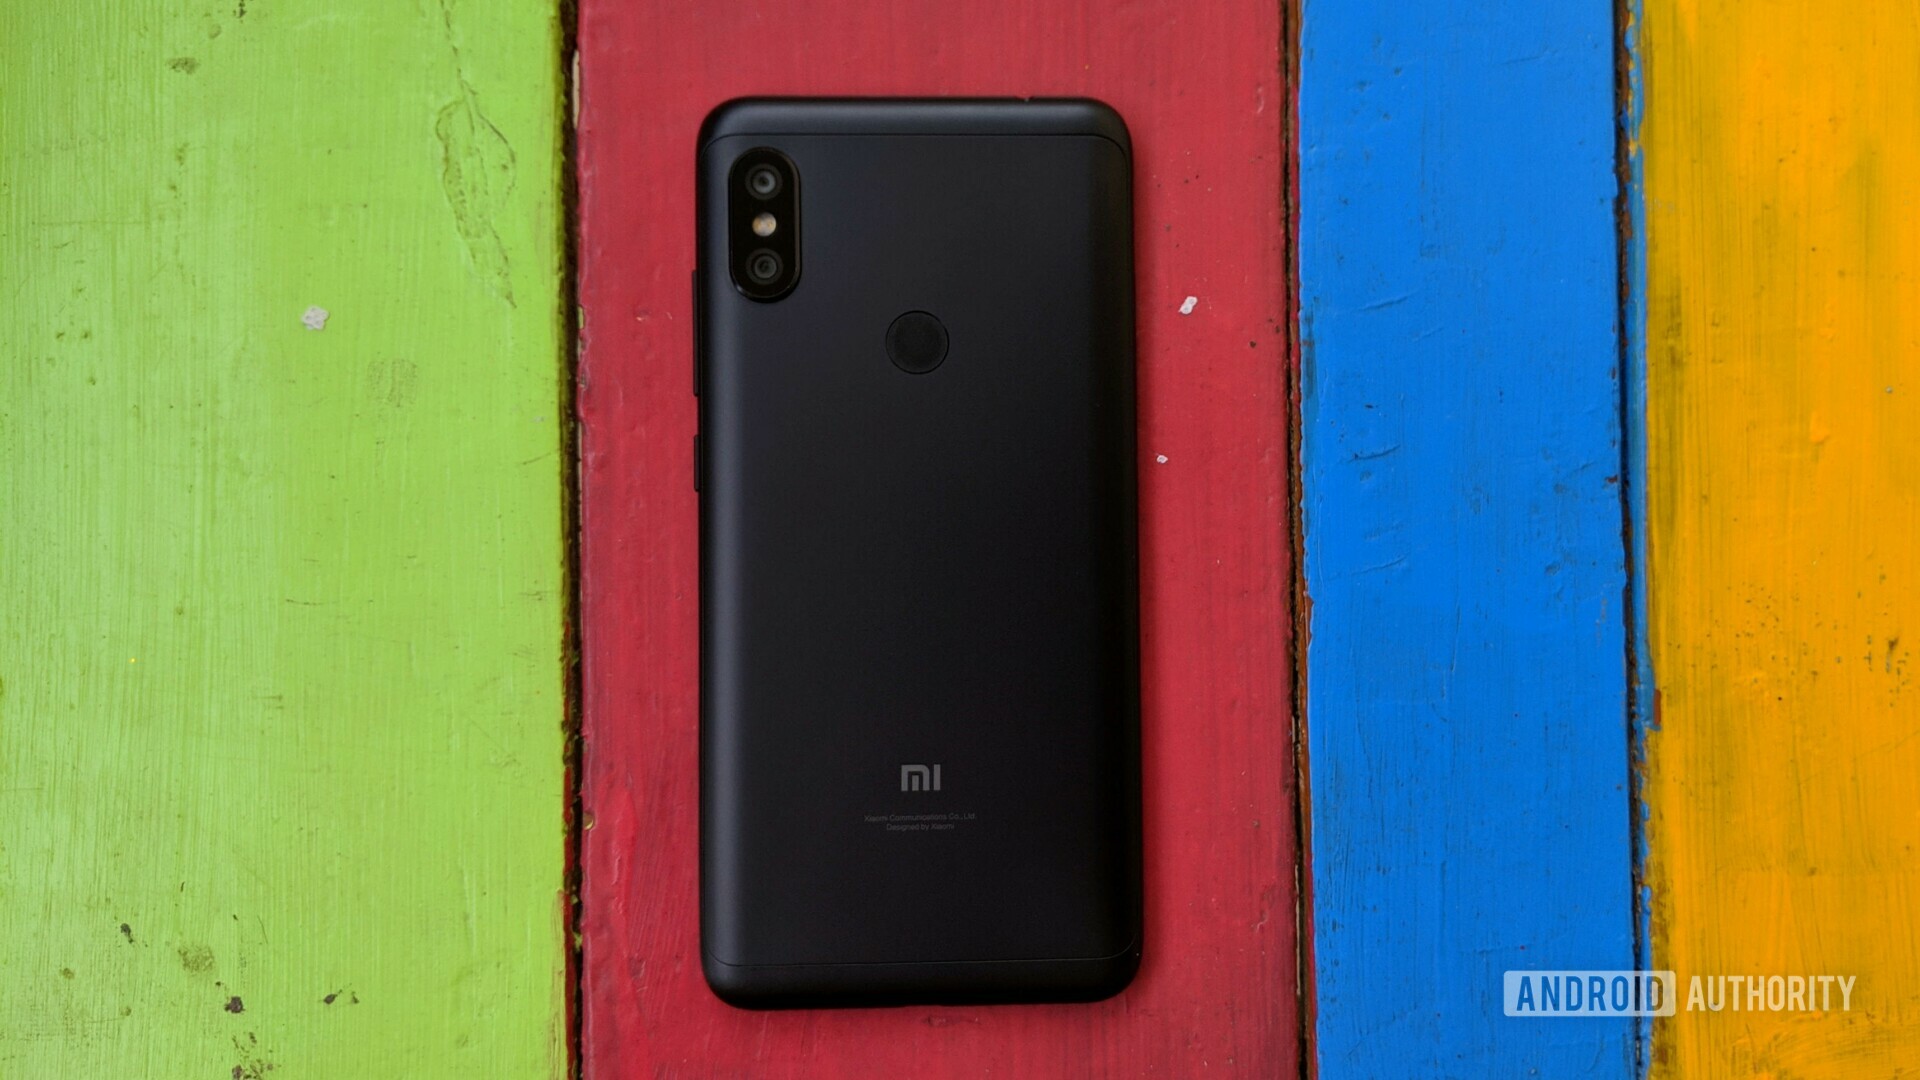 Photo of the backside of a Redmi Note 6 Pro on a colorful wooden background.